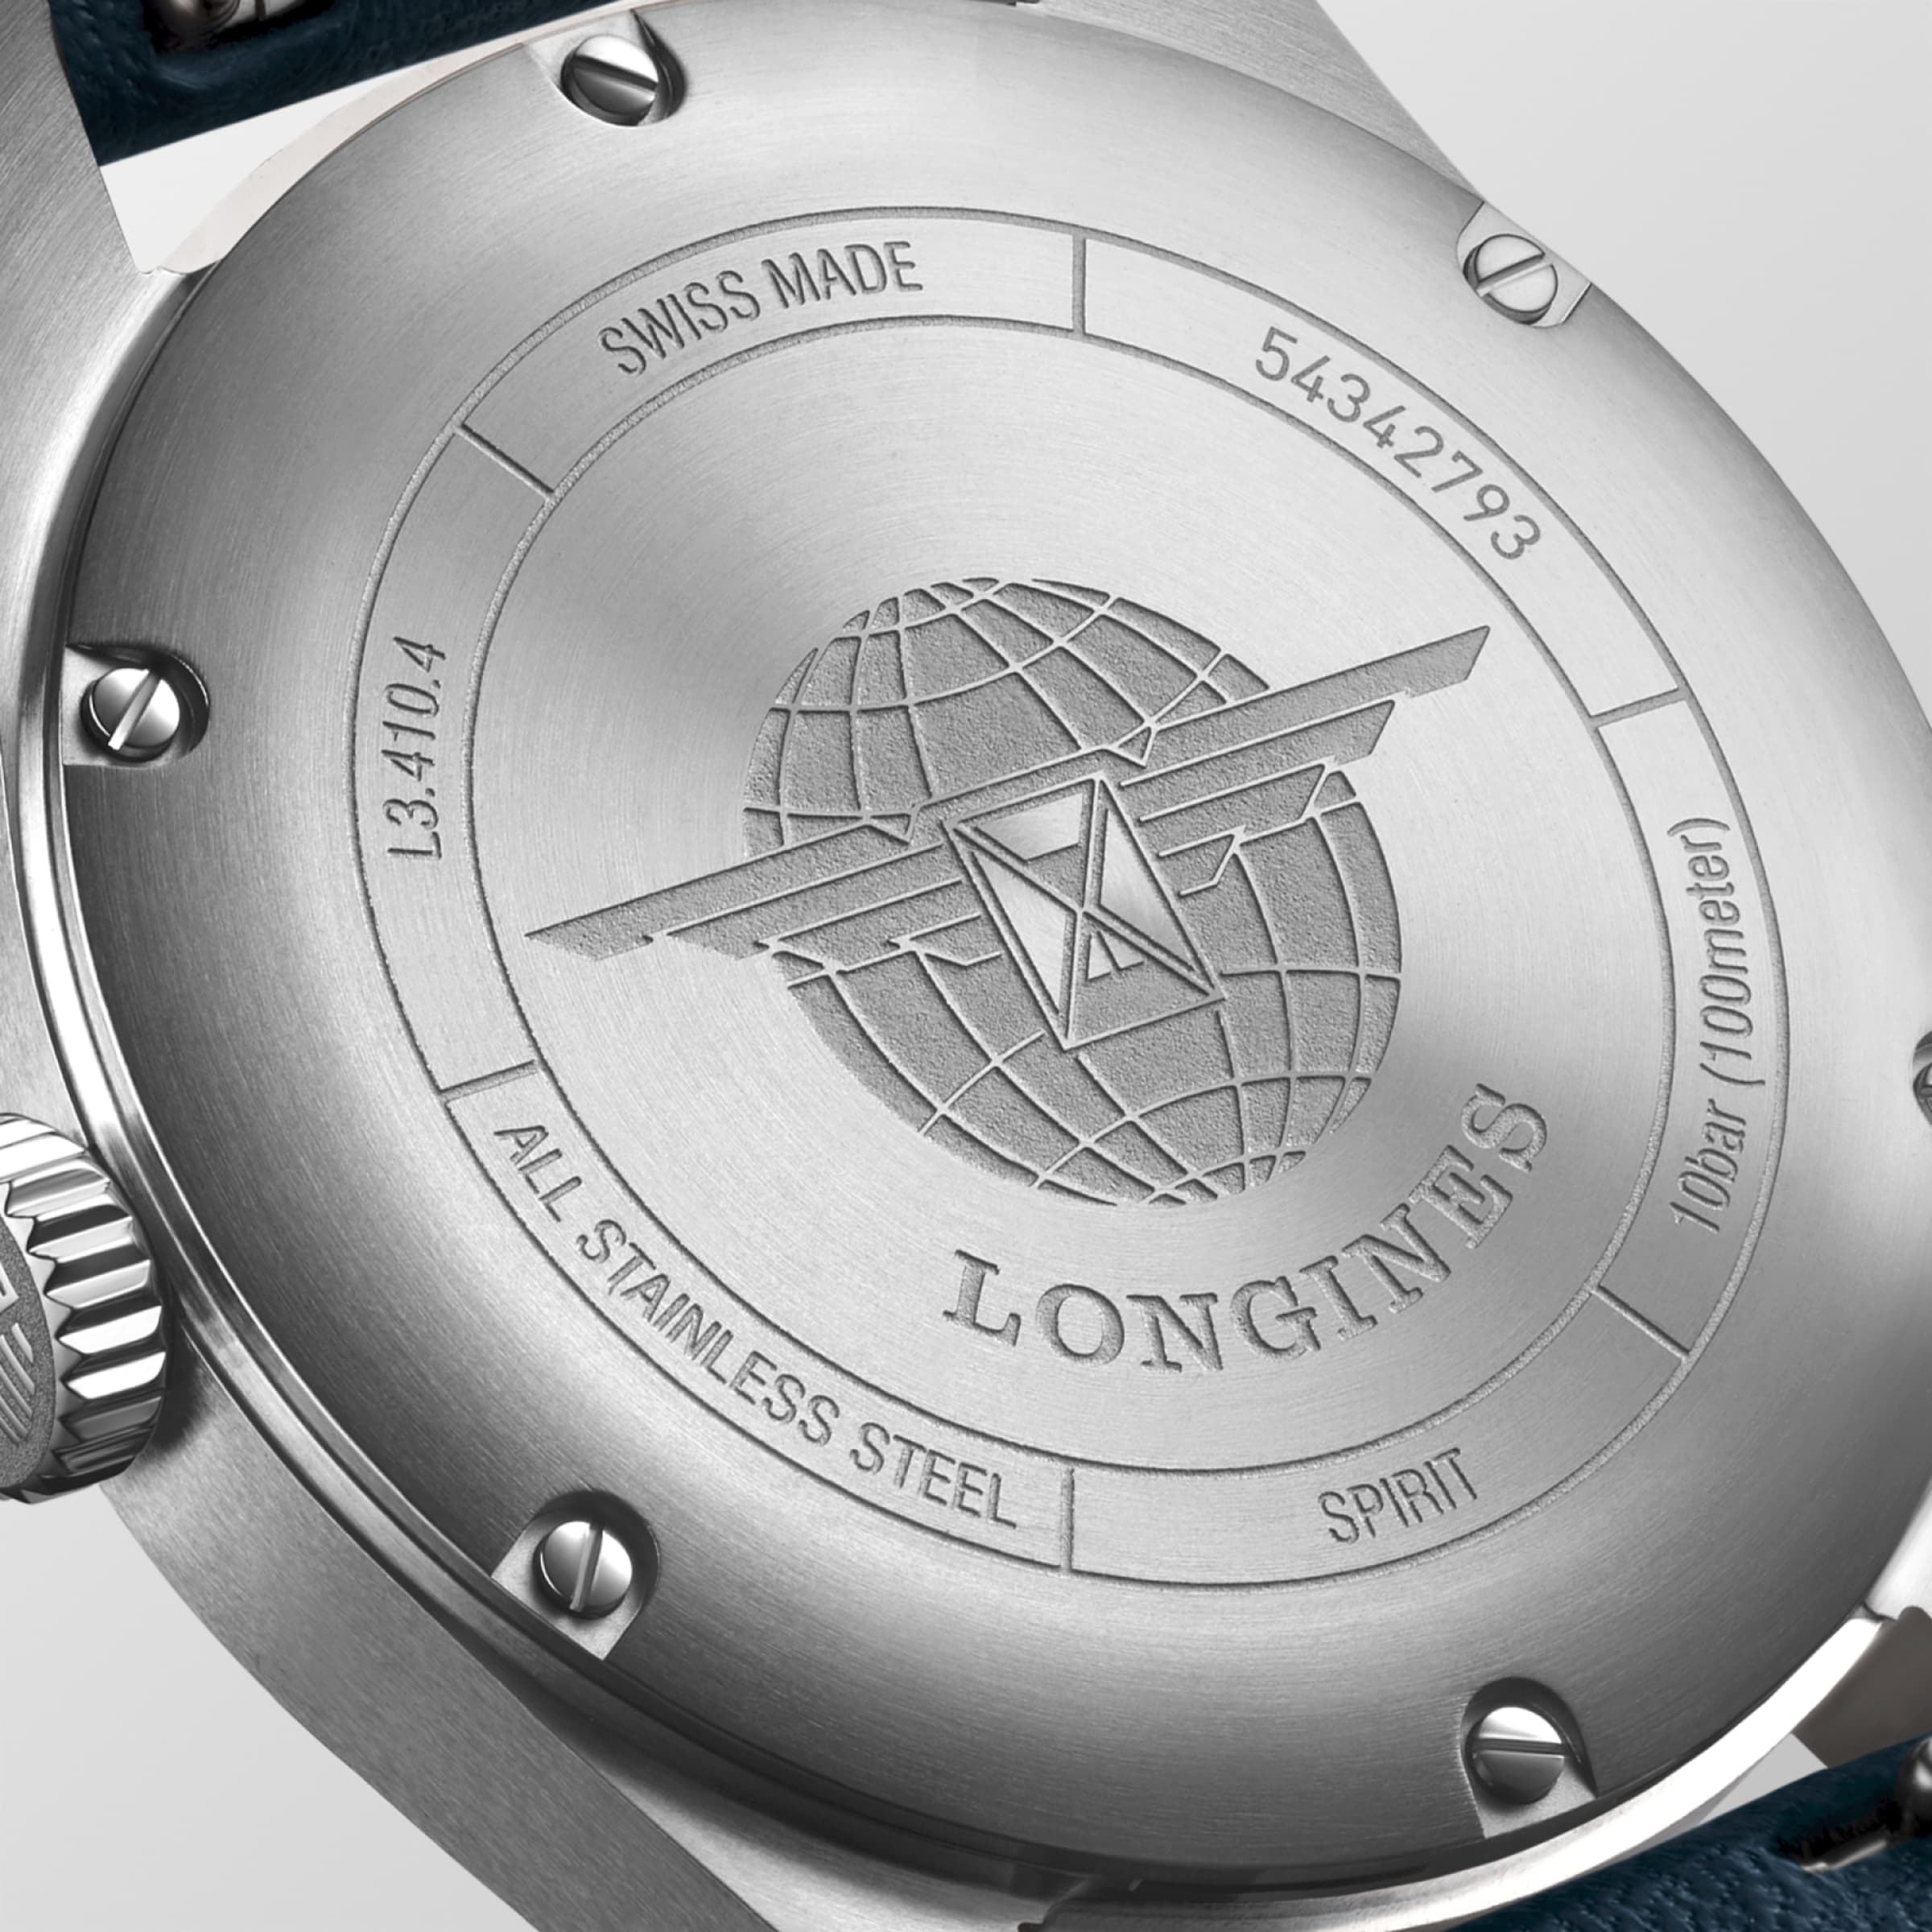 Longines SPIRIT Automatic Stainless steel Watch - L3.410.4.93.0